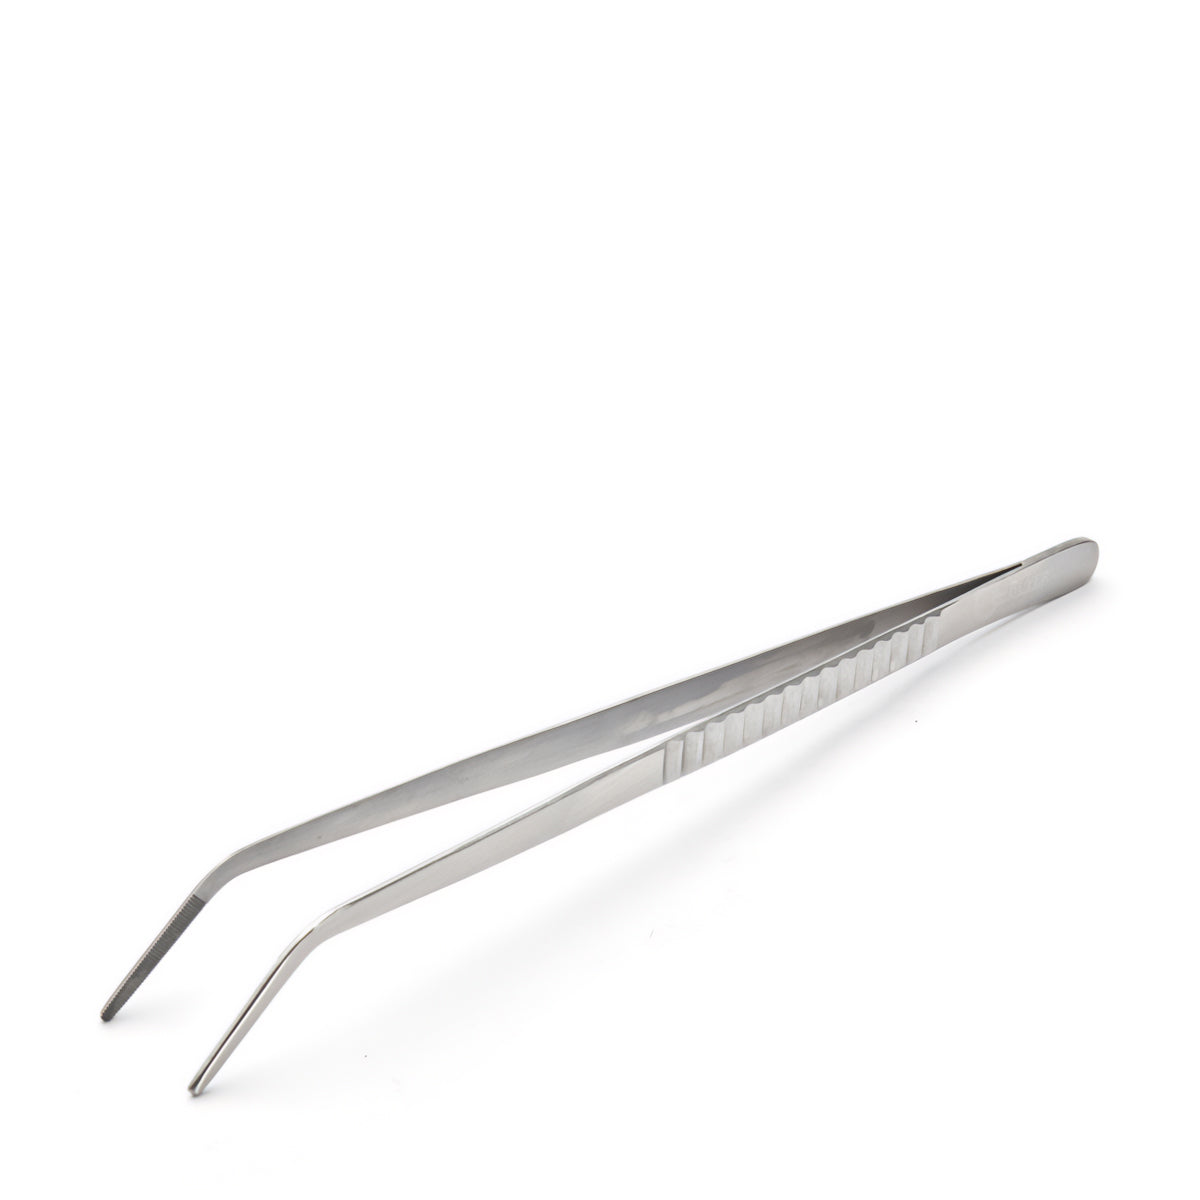 ST.STEEL TWEEZER WITH CURVED END 35